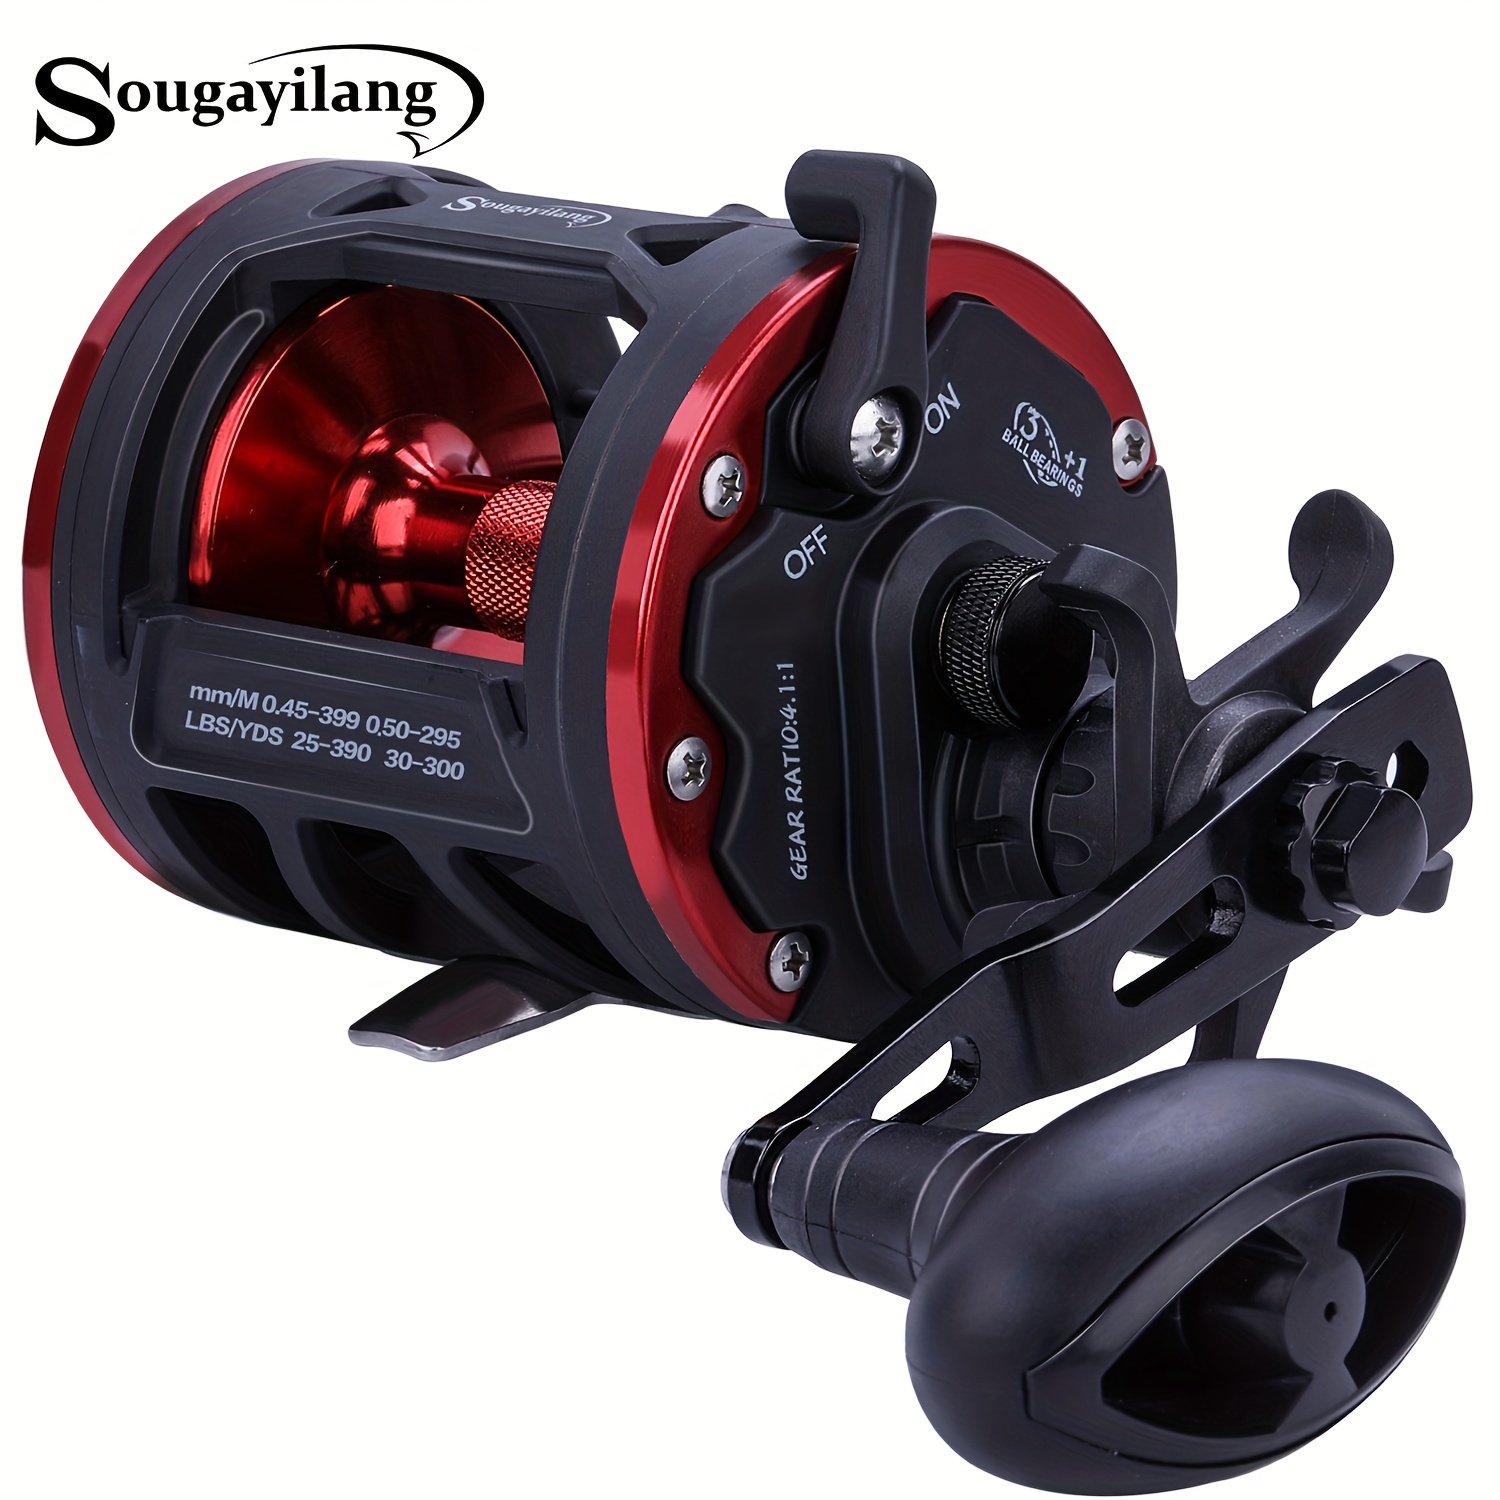  Strong Trolling Fishing Reel Saltwater Freshwater Bait Casting  Fishing Reels Right Hand Spinning Reel Trolling Reels : Sports & Outdoors